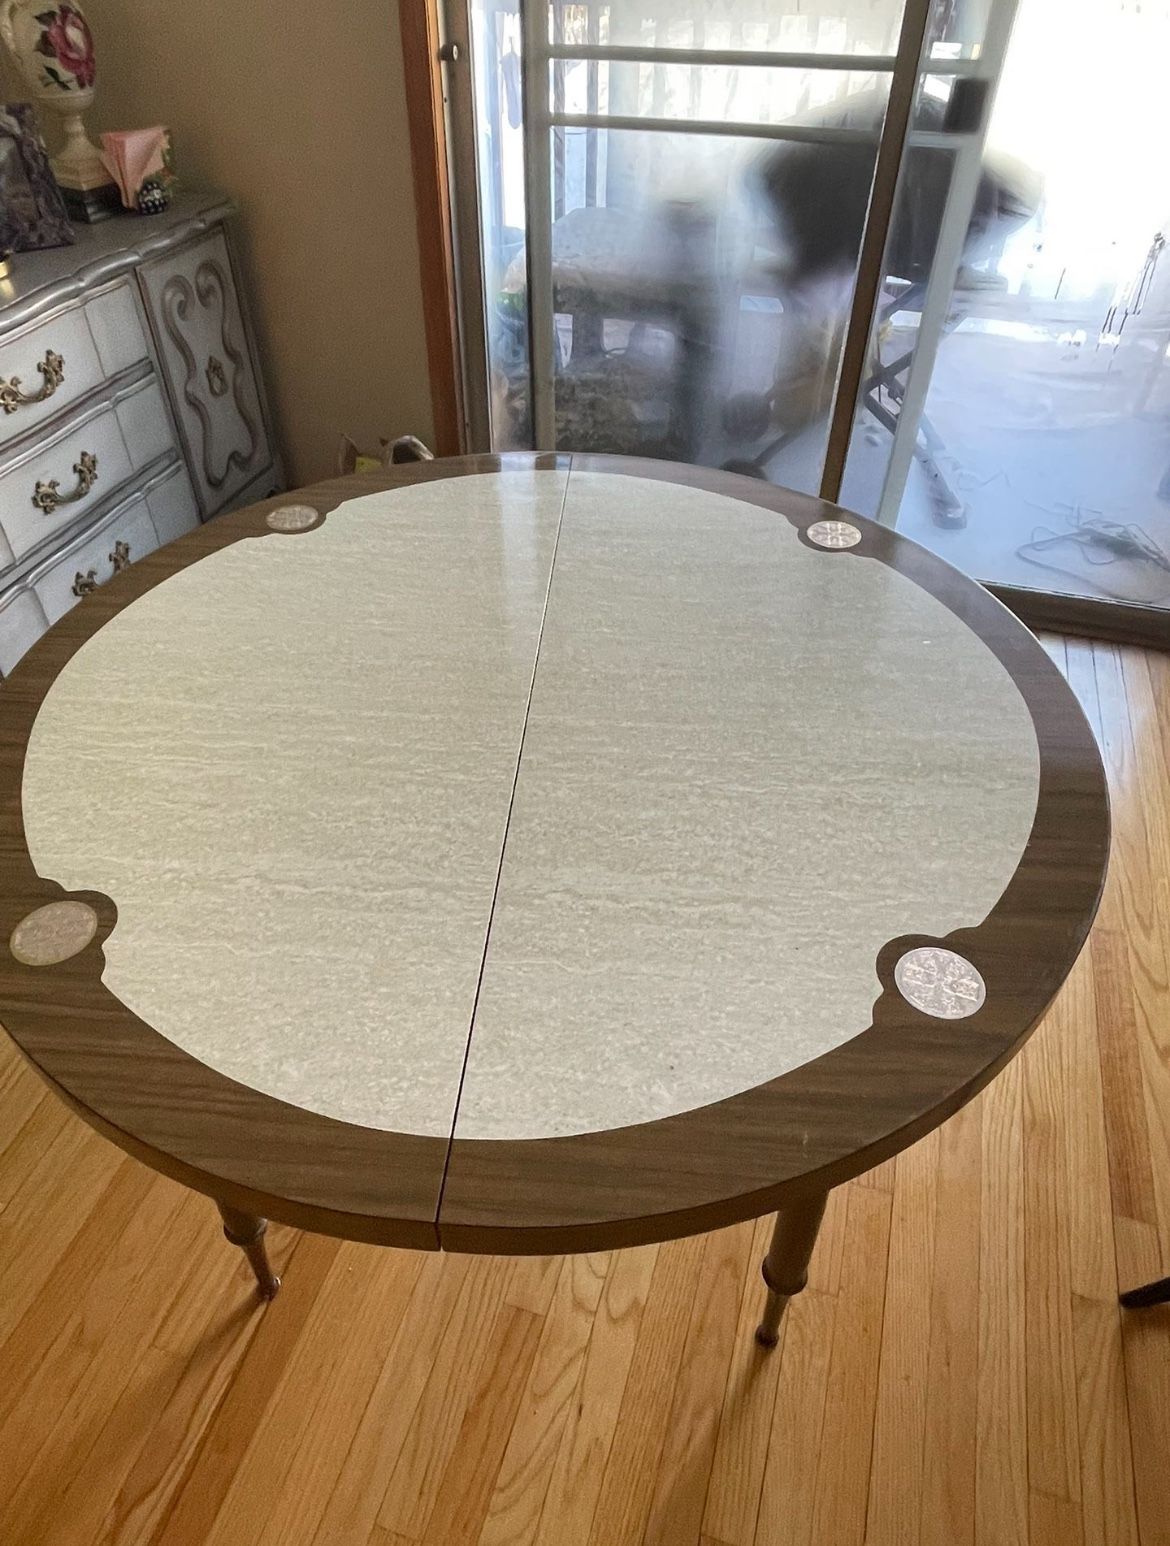 1940’s~50s round  expandable dinette table .